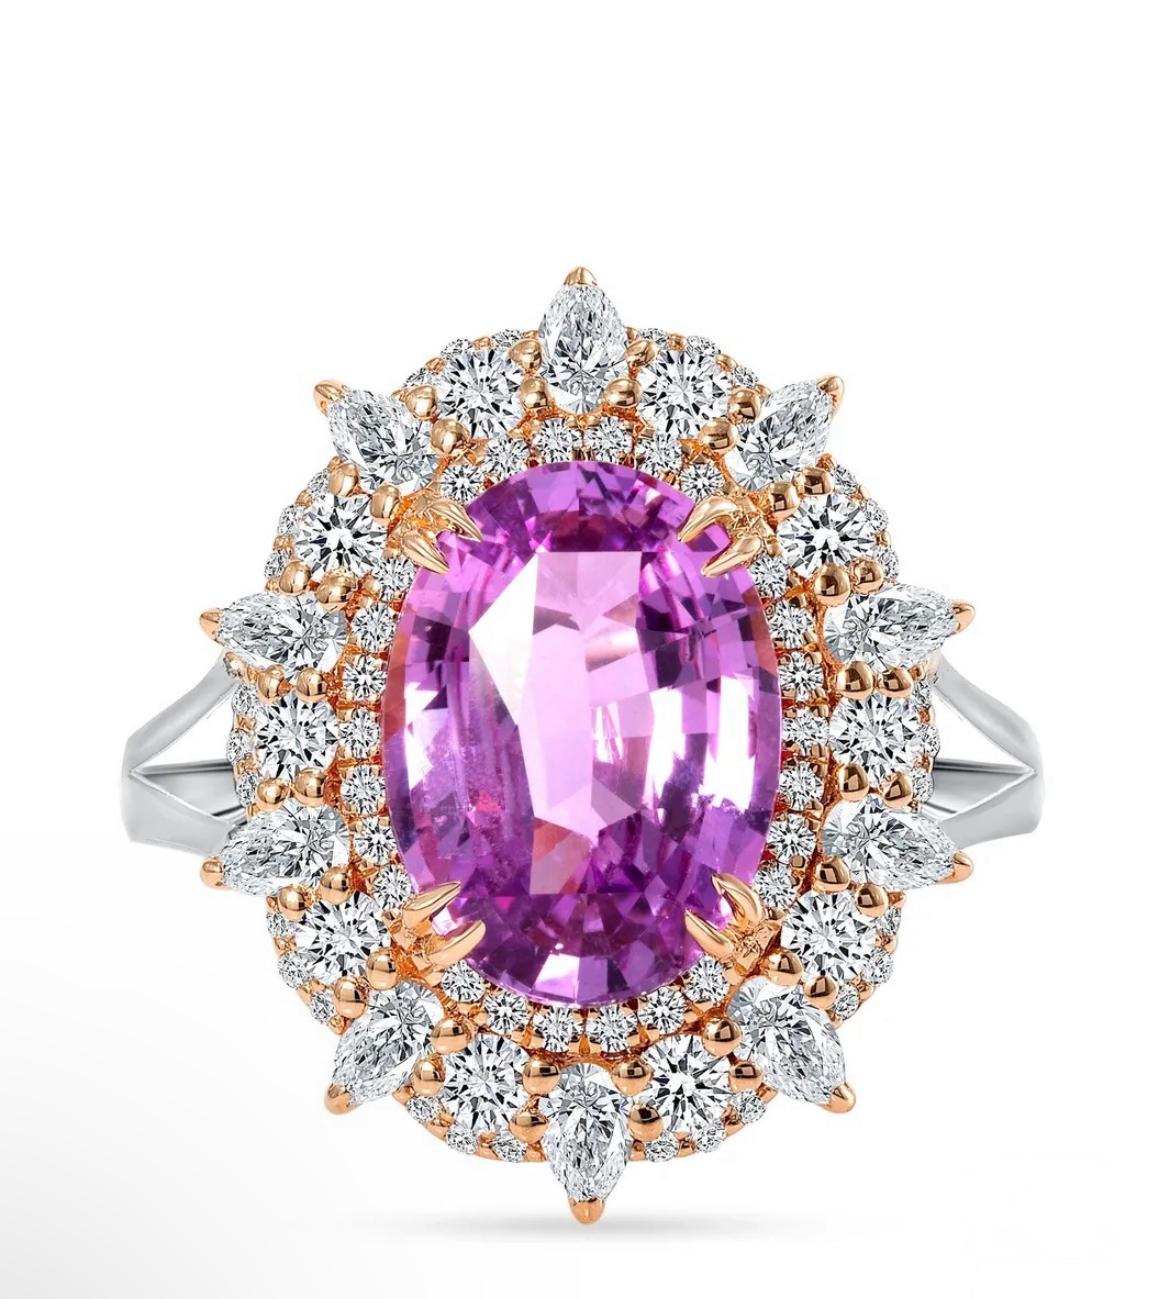 A distinctive 4.06-carat untreated pink sapphire from Sri-Lanka is the star of this ring. Ten pear-shaped and numerous round sparkling diamonds support this all-natural sapphire. 

Beautifully crafted in platinum with 18K yellow gold, the romantic